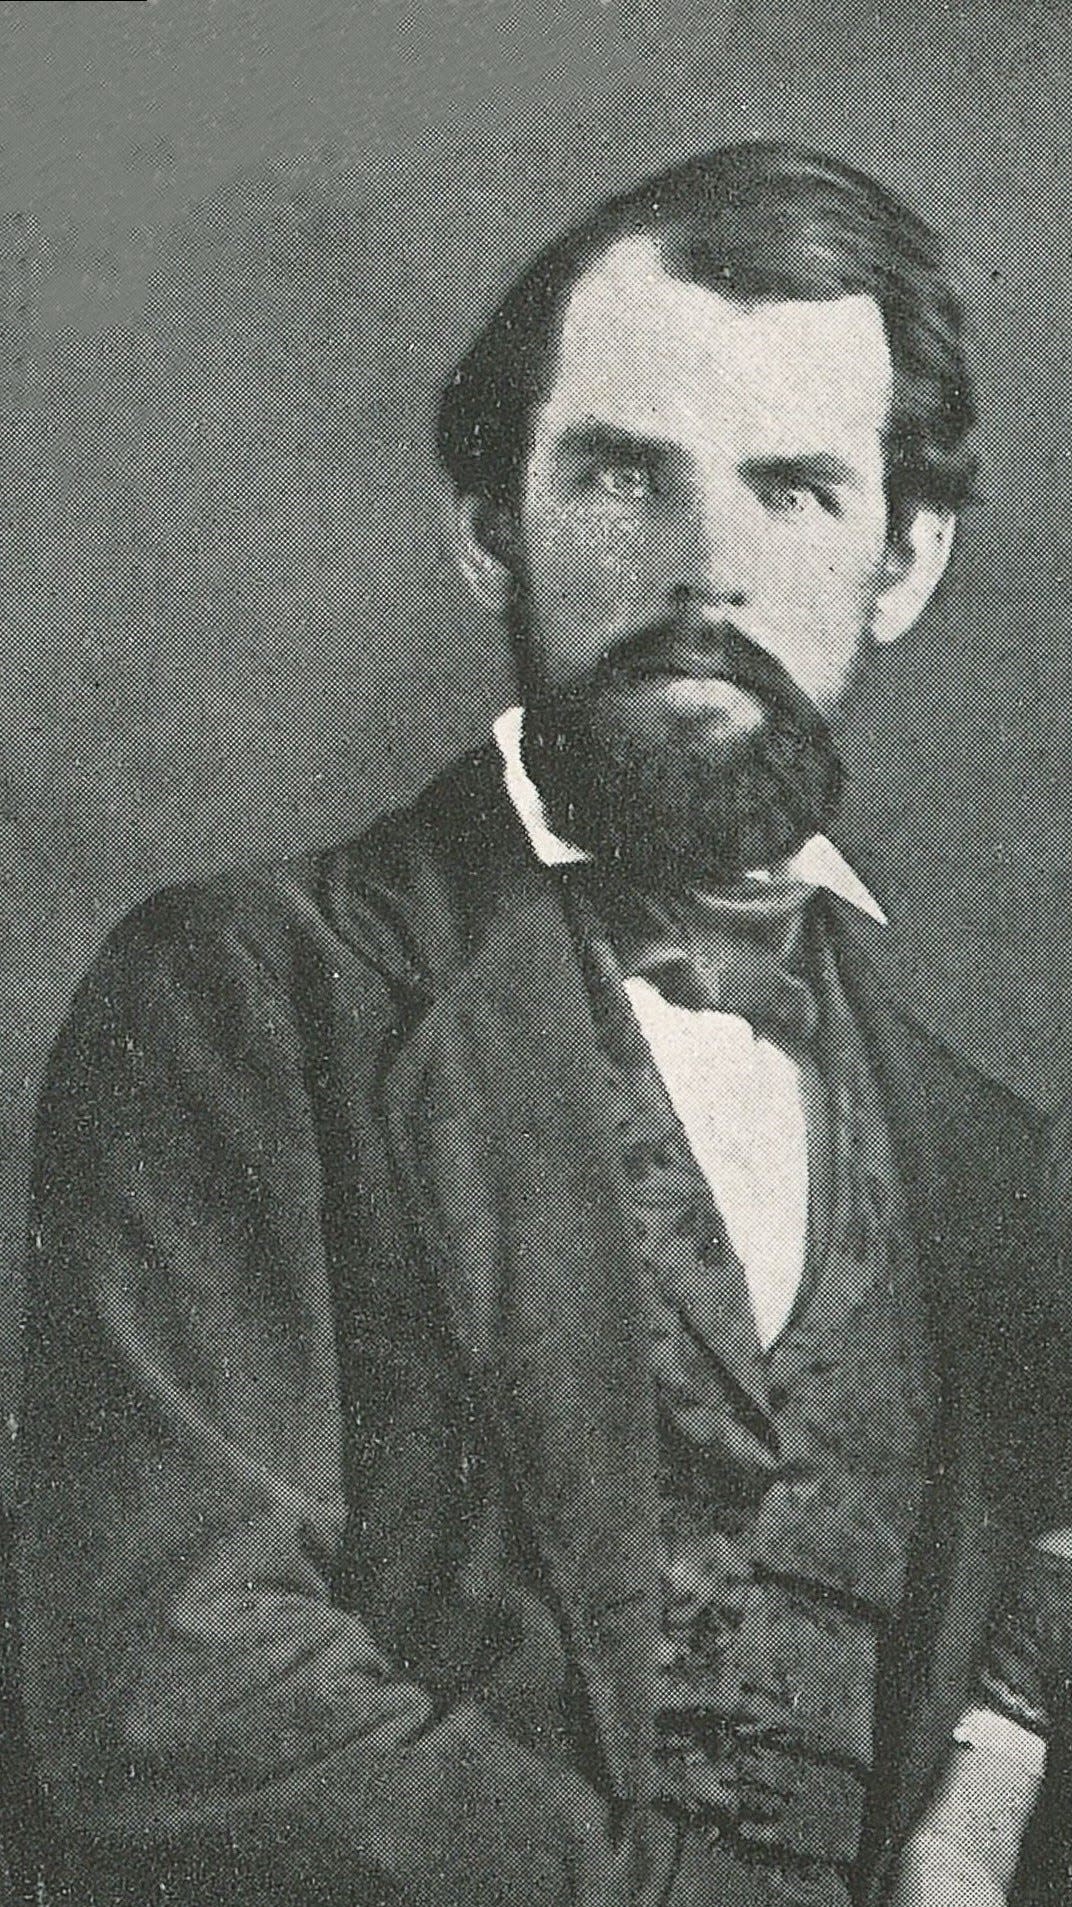 Levi Coman fought in the Battle of Shiloh in the Civil War.